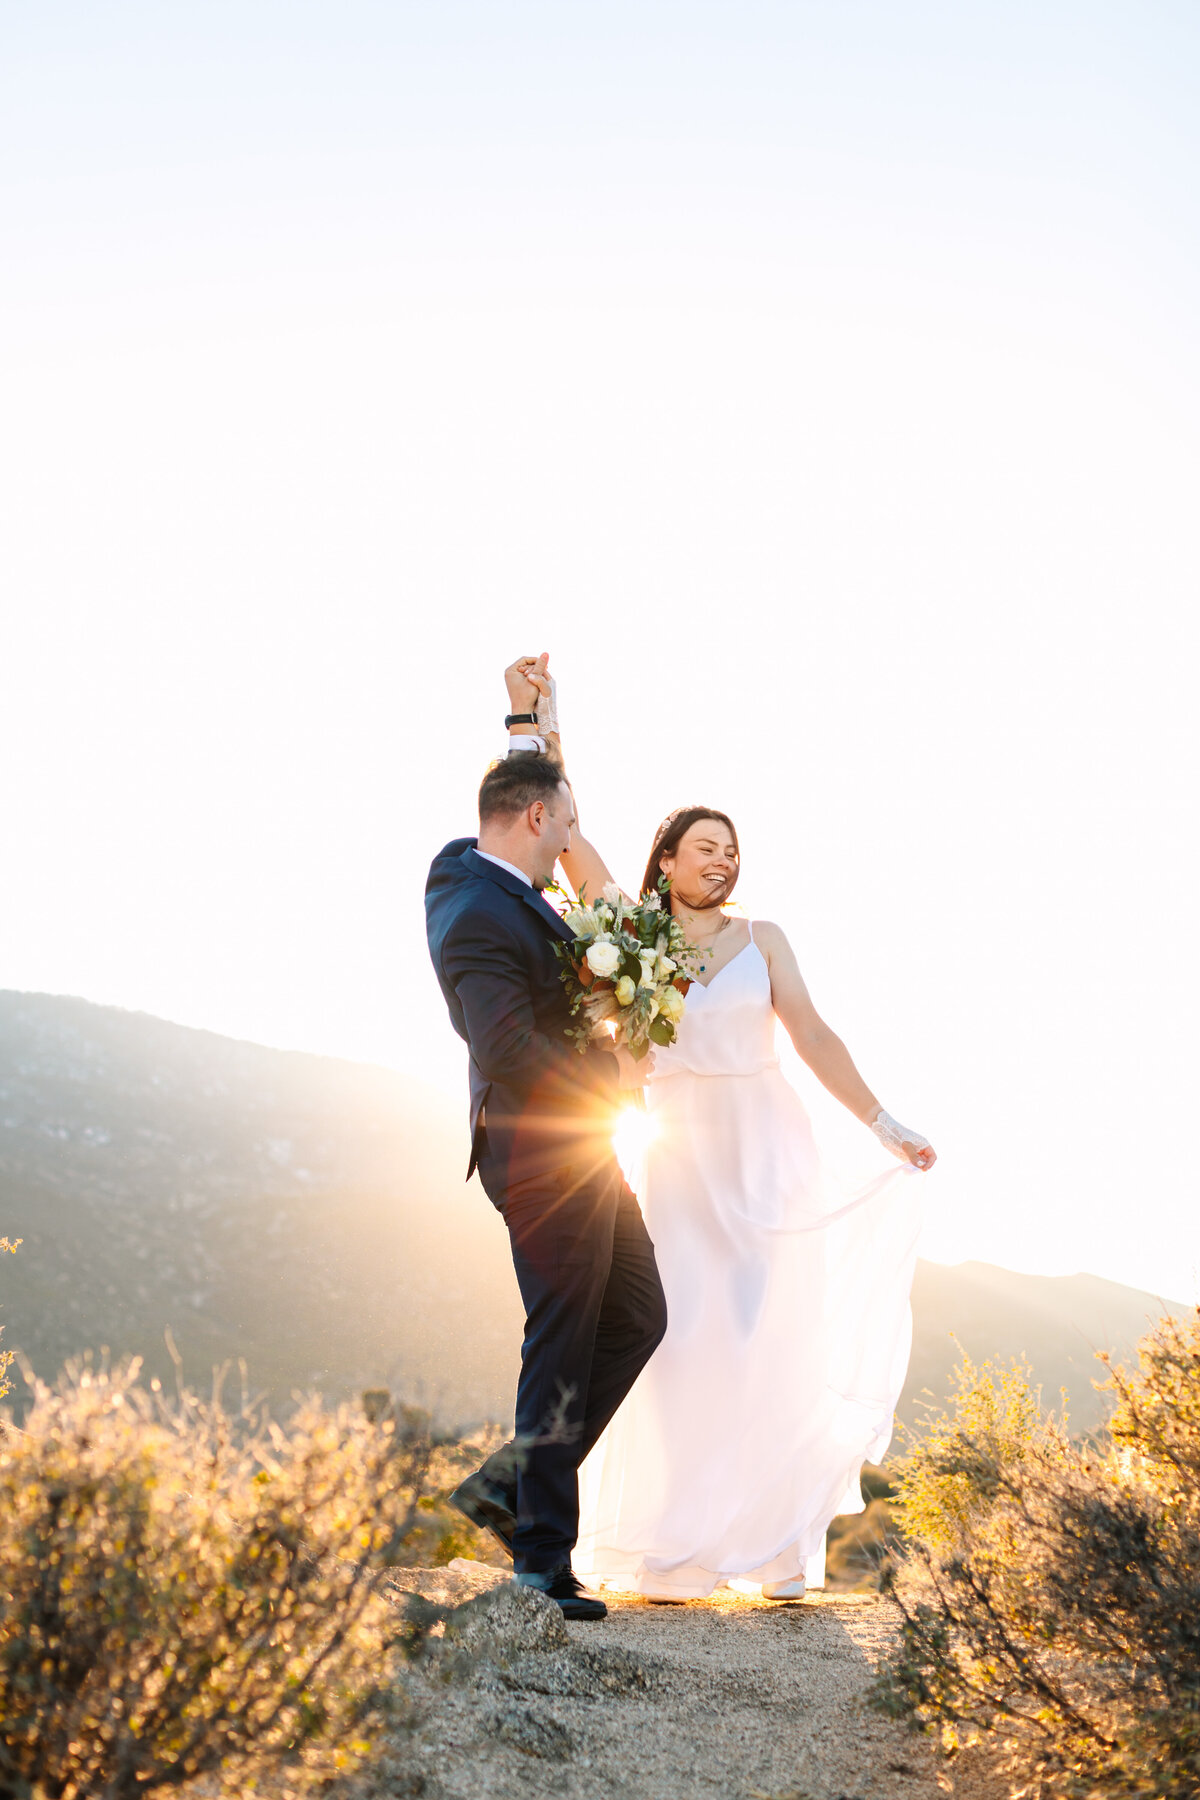 Couples wedding portraits bride groom sunset with sun flare in Idyllwild, CA